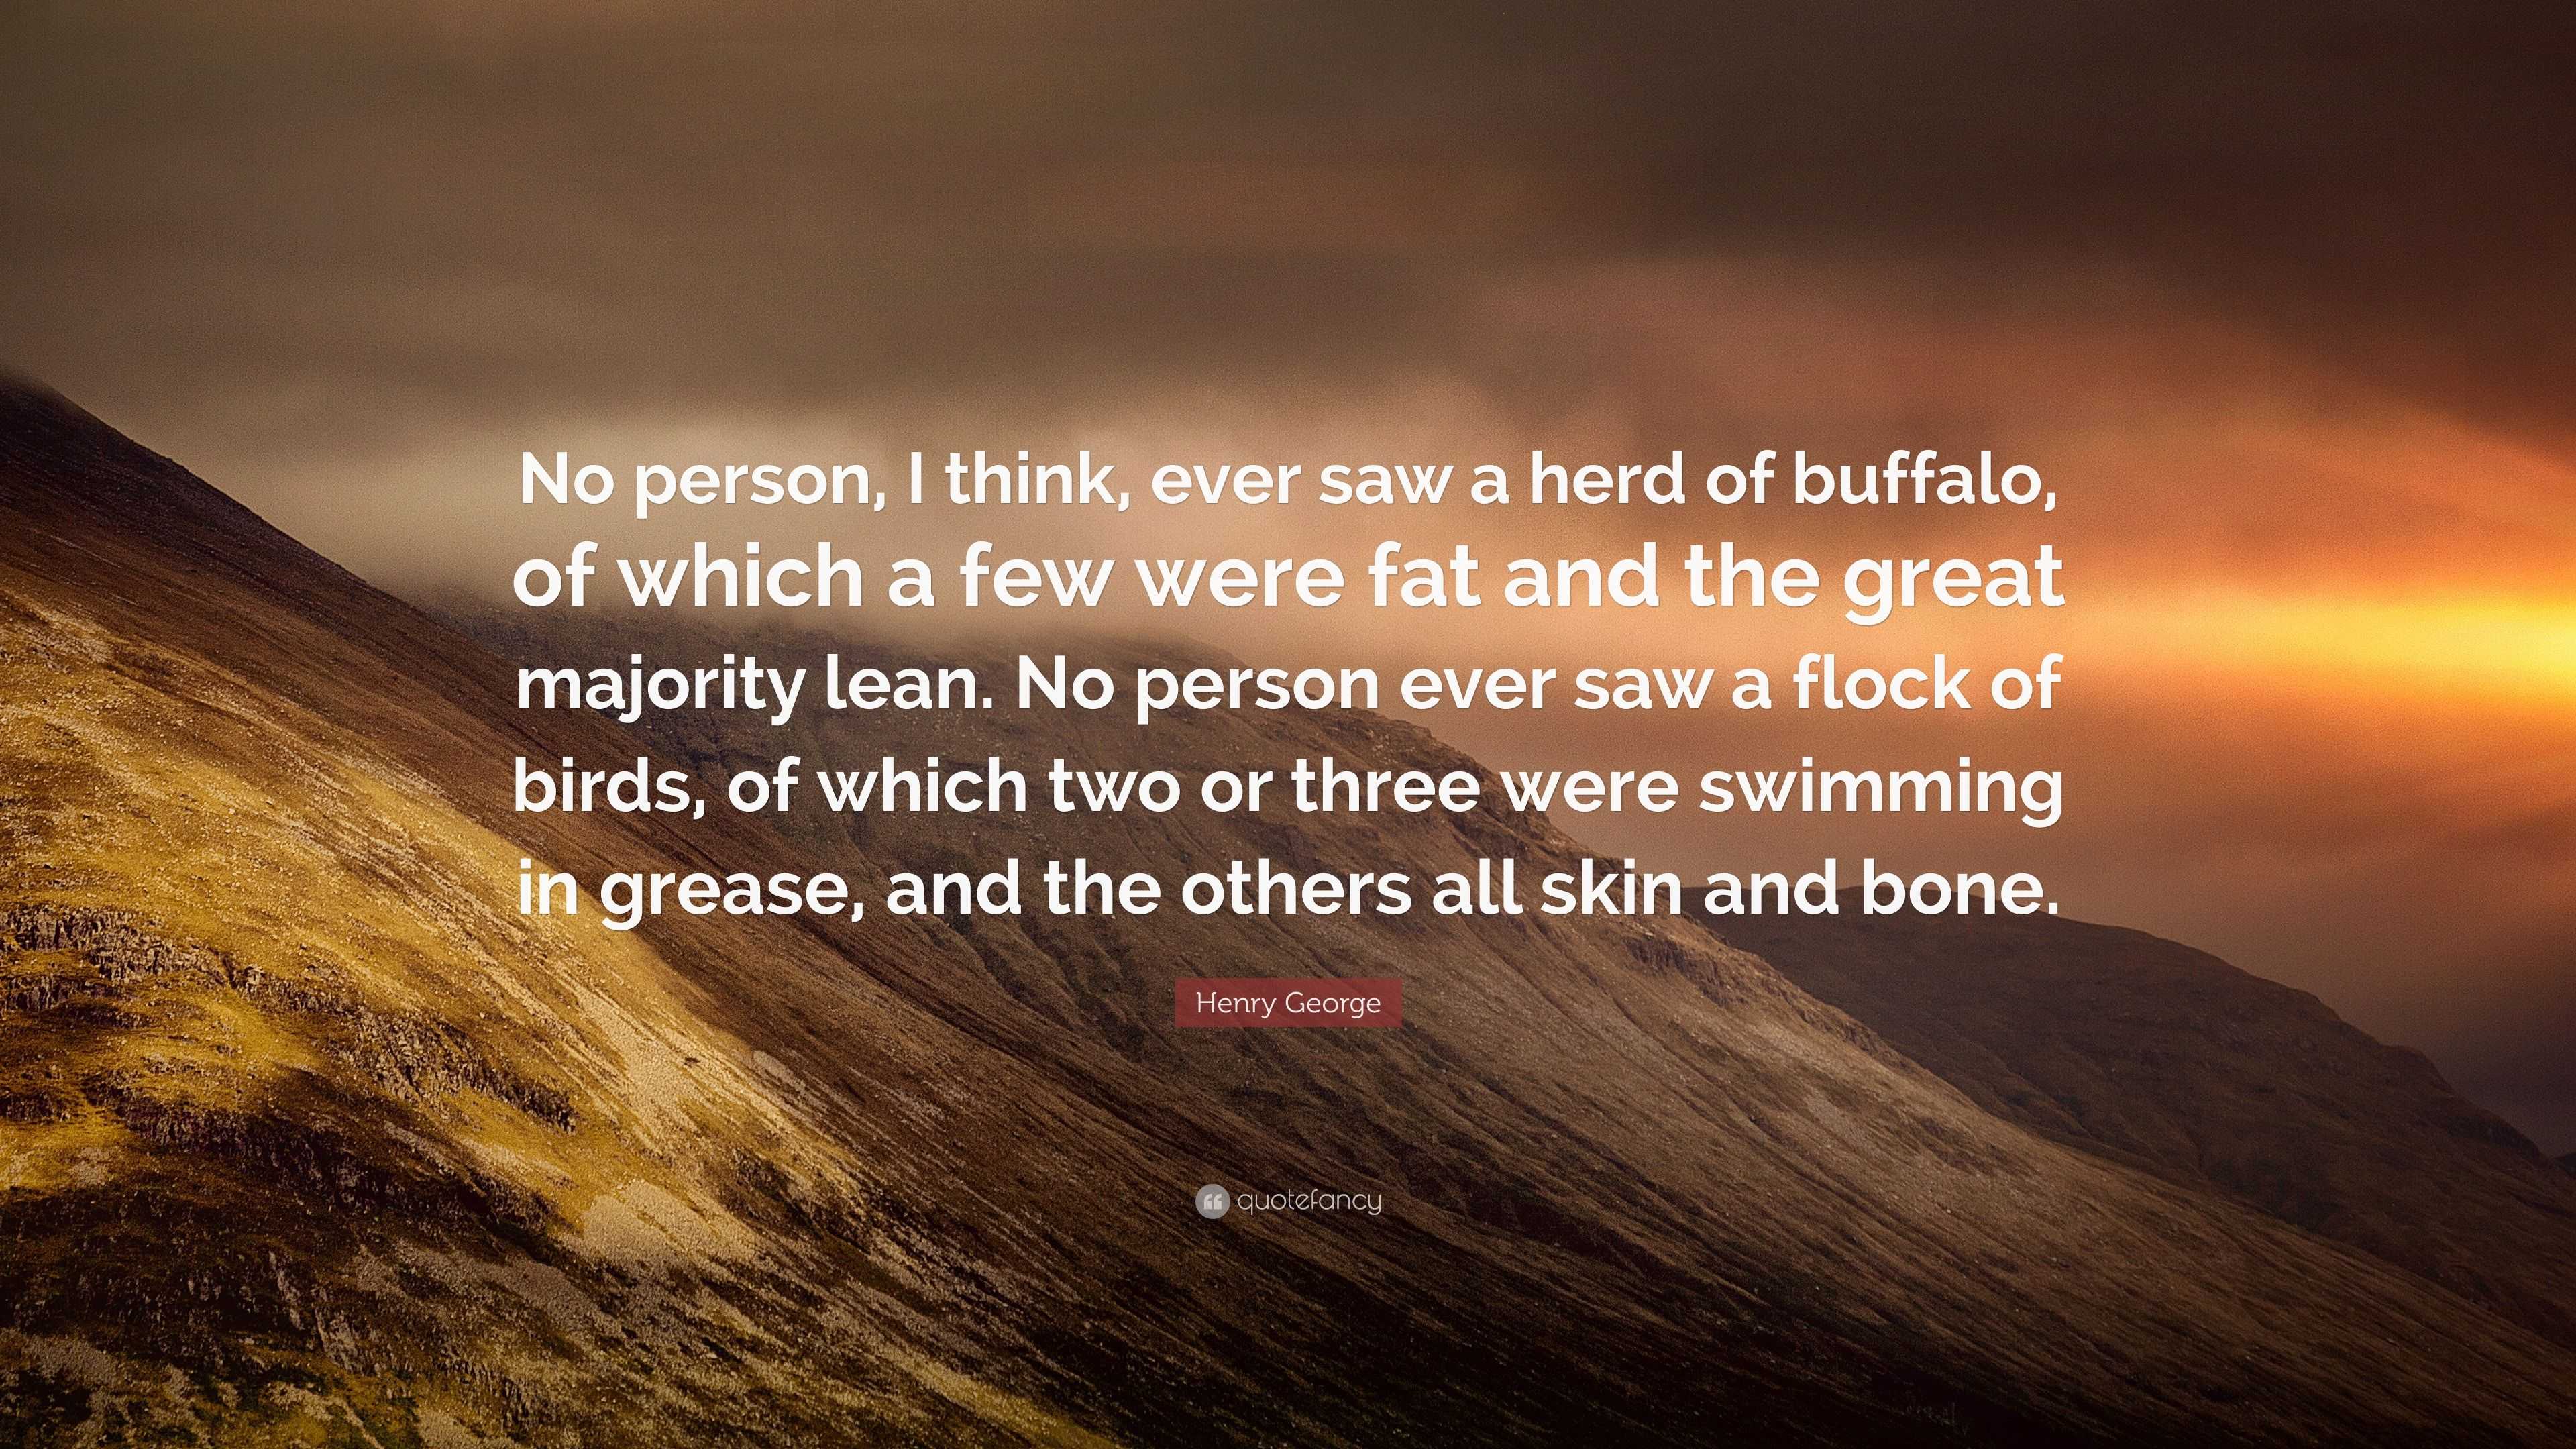 Henry George Quote No Person I Think Ever Saw A Herd Of Buffalo Of Which A Few Were Fat And The Great Majority Lean No Person Ever Saw